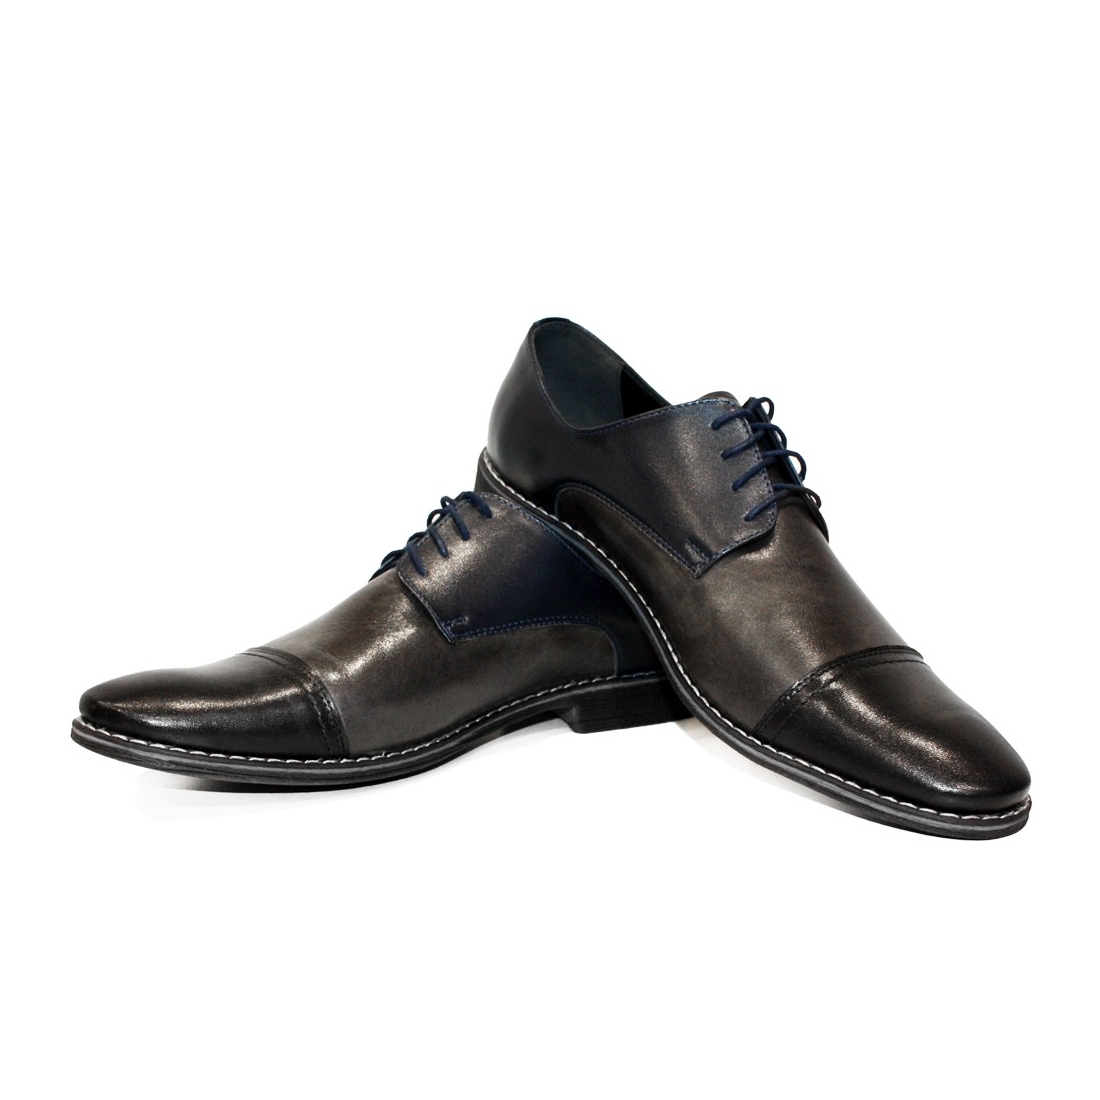 Modello Barillo - Navy Blue Lace-Up Oxfords Dress Shoes - Cowhide ...